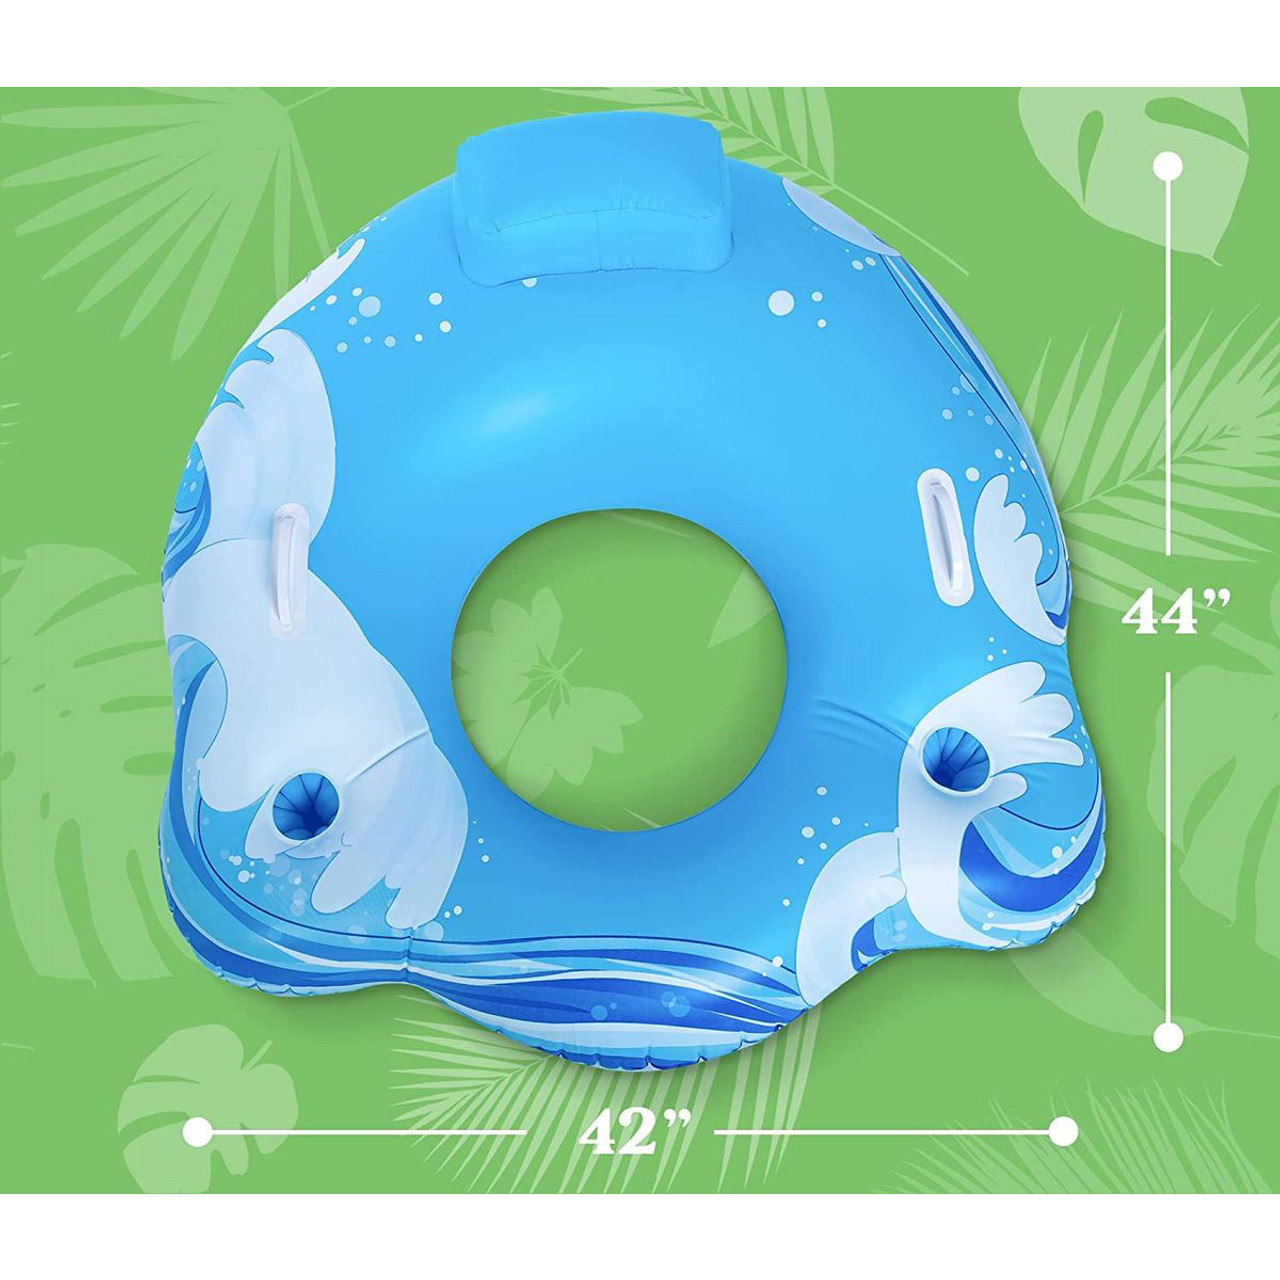 Inflatable Pool Lounger Float product image